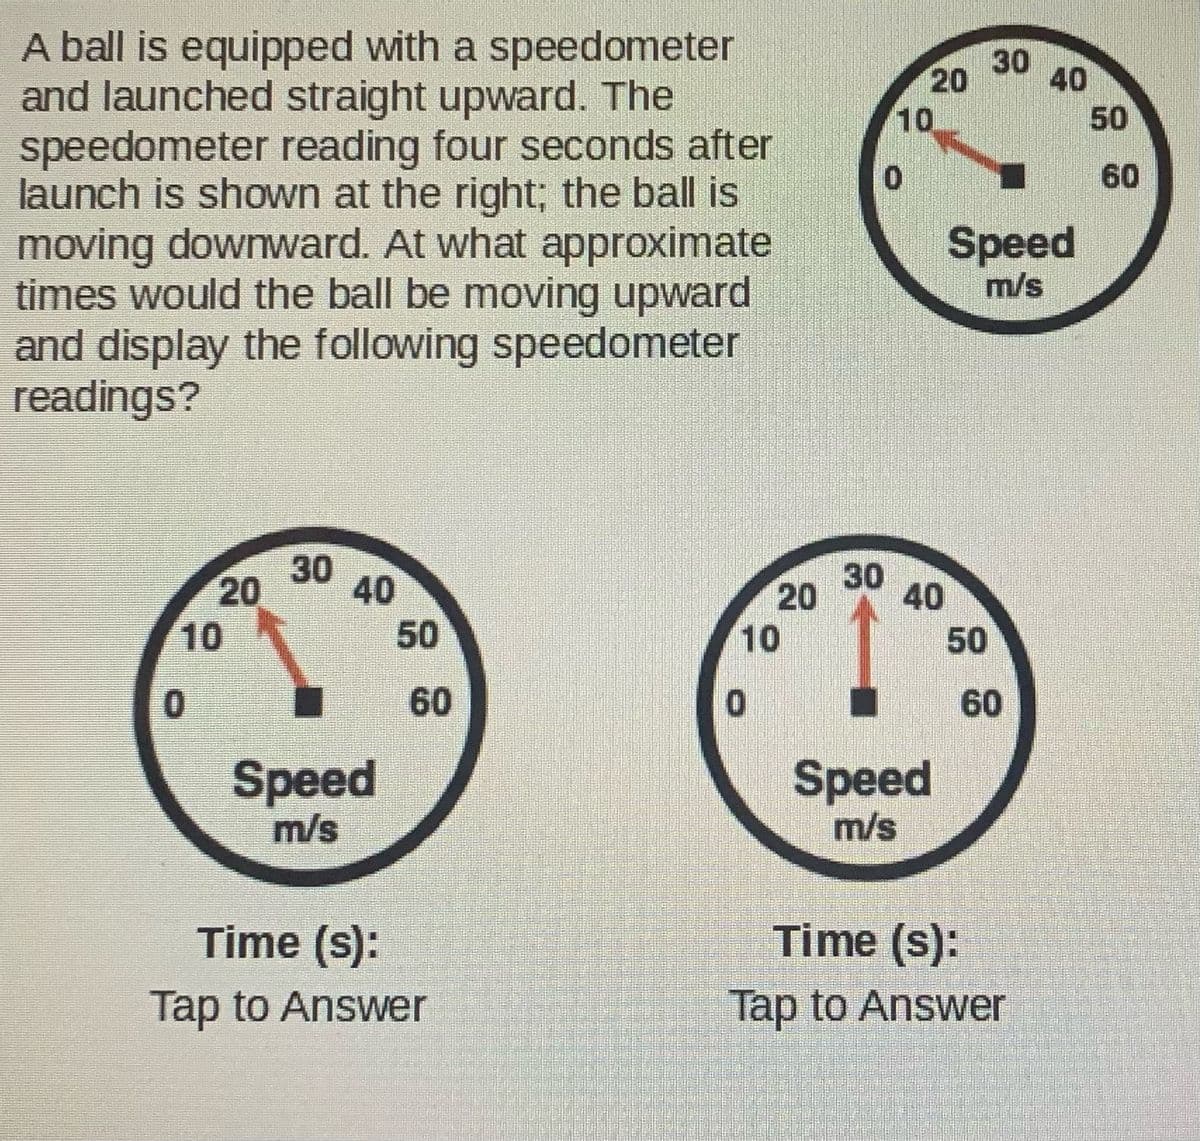 A ball is equipped with a speedometer
and launched straight upward. The
speedometer reading four seconds after
launch is shown at the right; the ball is
moving downward. At what approximate
times would the ball be moving upward
and display the following speedometer
readings?
30
40
20
10
50
60
Speed
m/s
30
20
10
30
40
50
10
50
60
60
Speed
m/s
Speed
m/s
Time (s):
Time (s):
Tap to Answer
Tap to Answer
20
40
